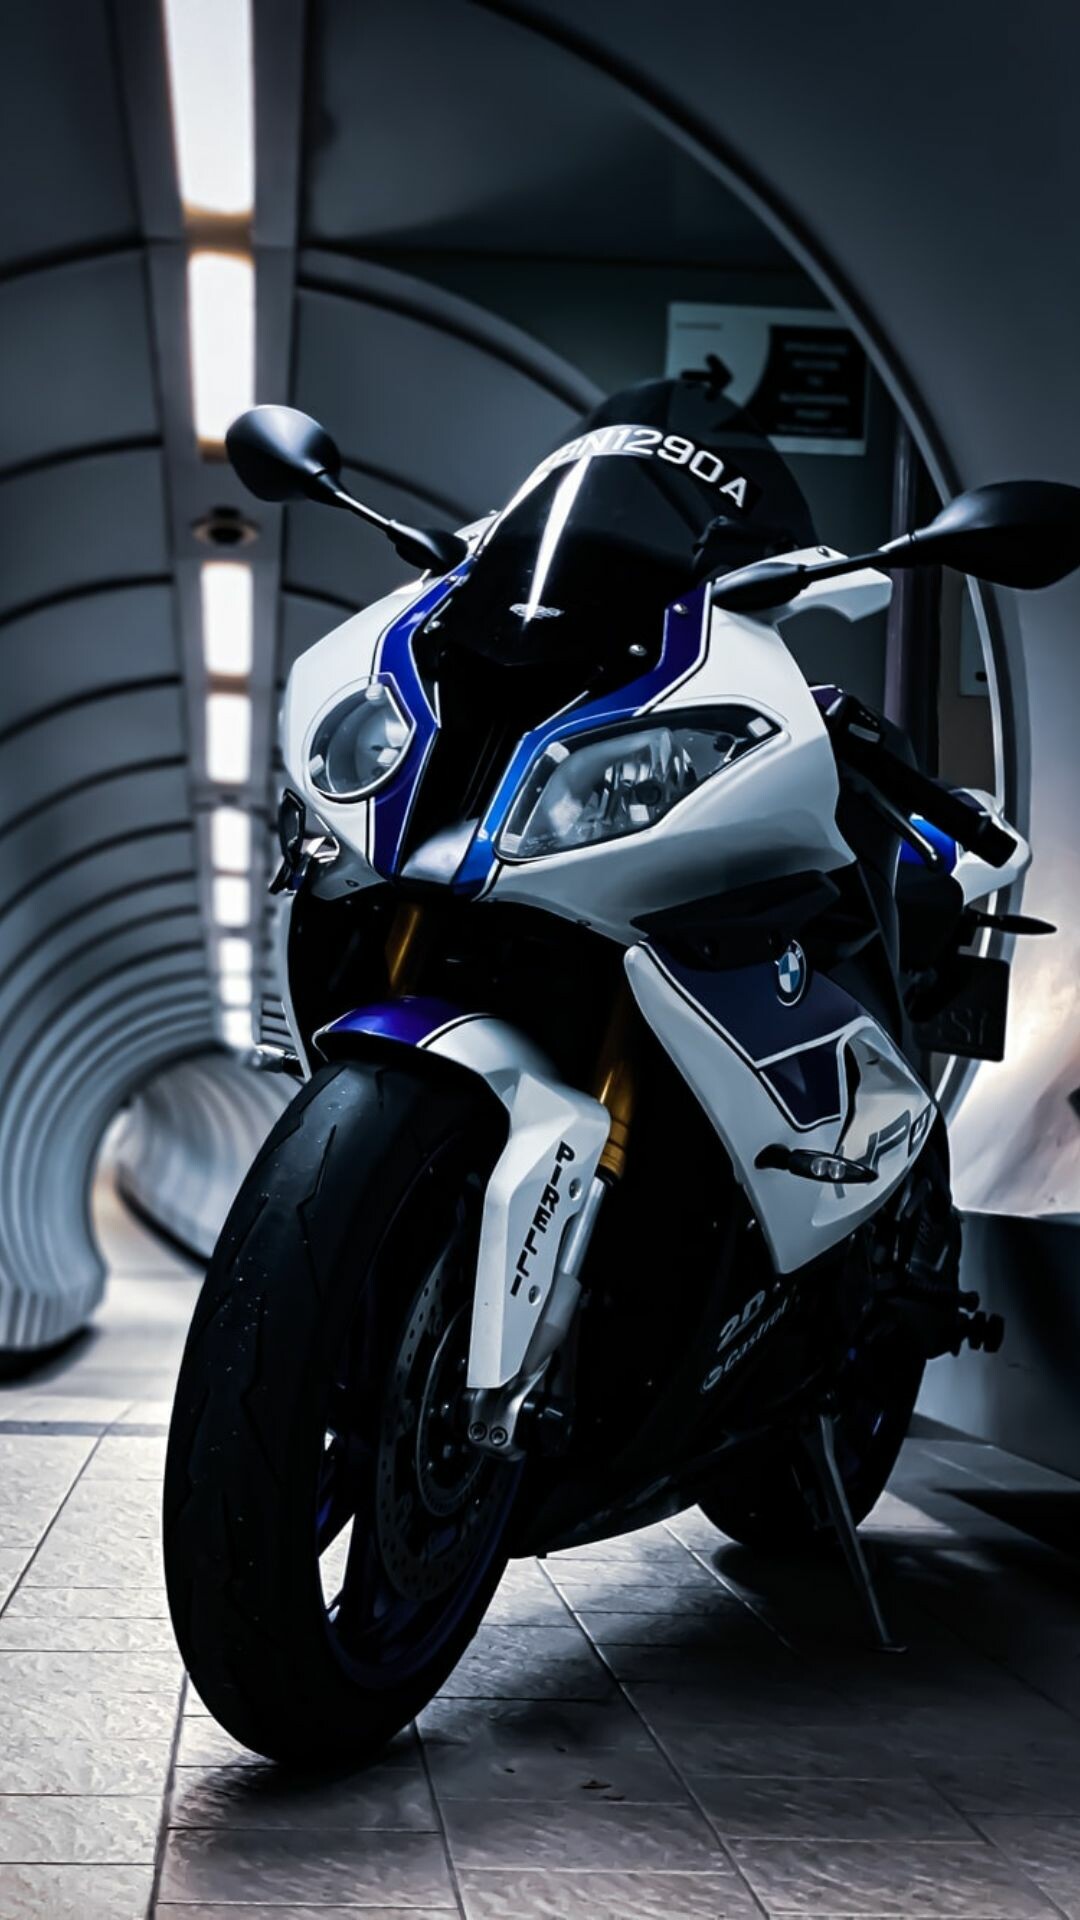 Bike: BMW S1000RR, Made to compete in the 2009 Superbike World Championship. 1080x1920 Full HD Wallpaper.